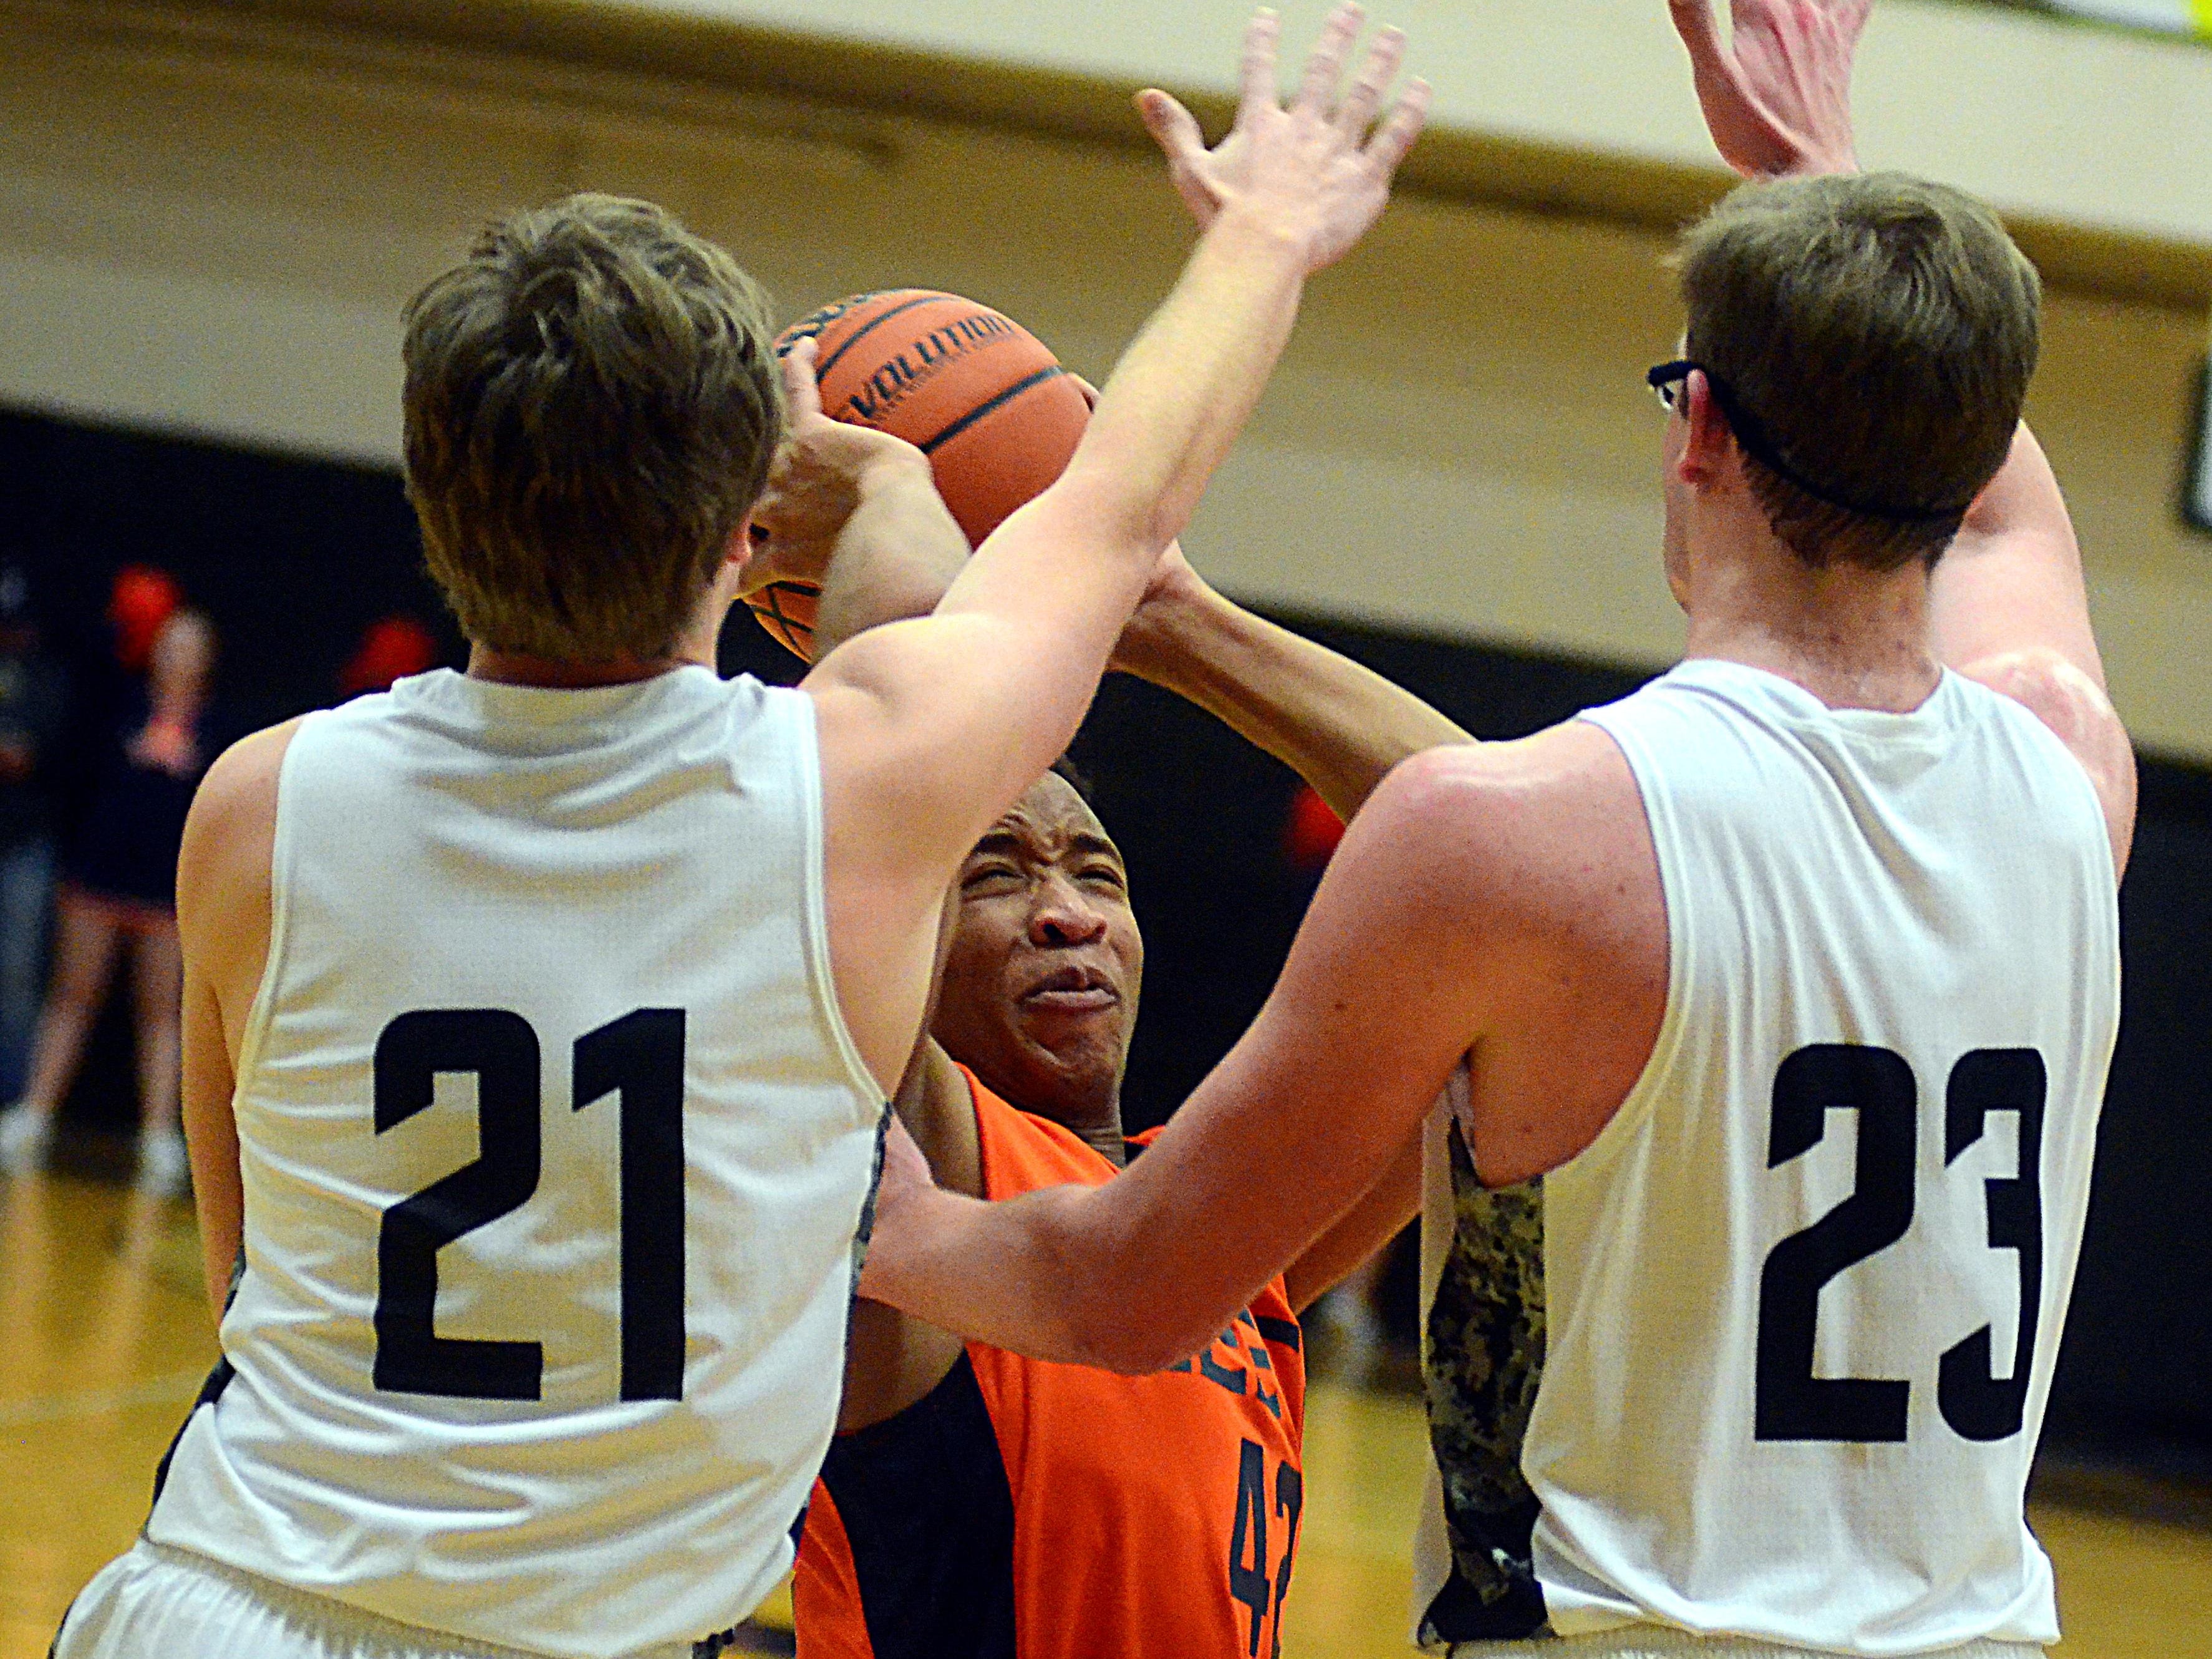 Beech High senior Caleb Walton is surrounded by Hendersonville junior Justin Ernst (21) and senior Preston Brown during second-quarter action. Walton scored 11 points.